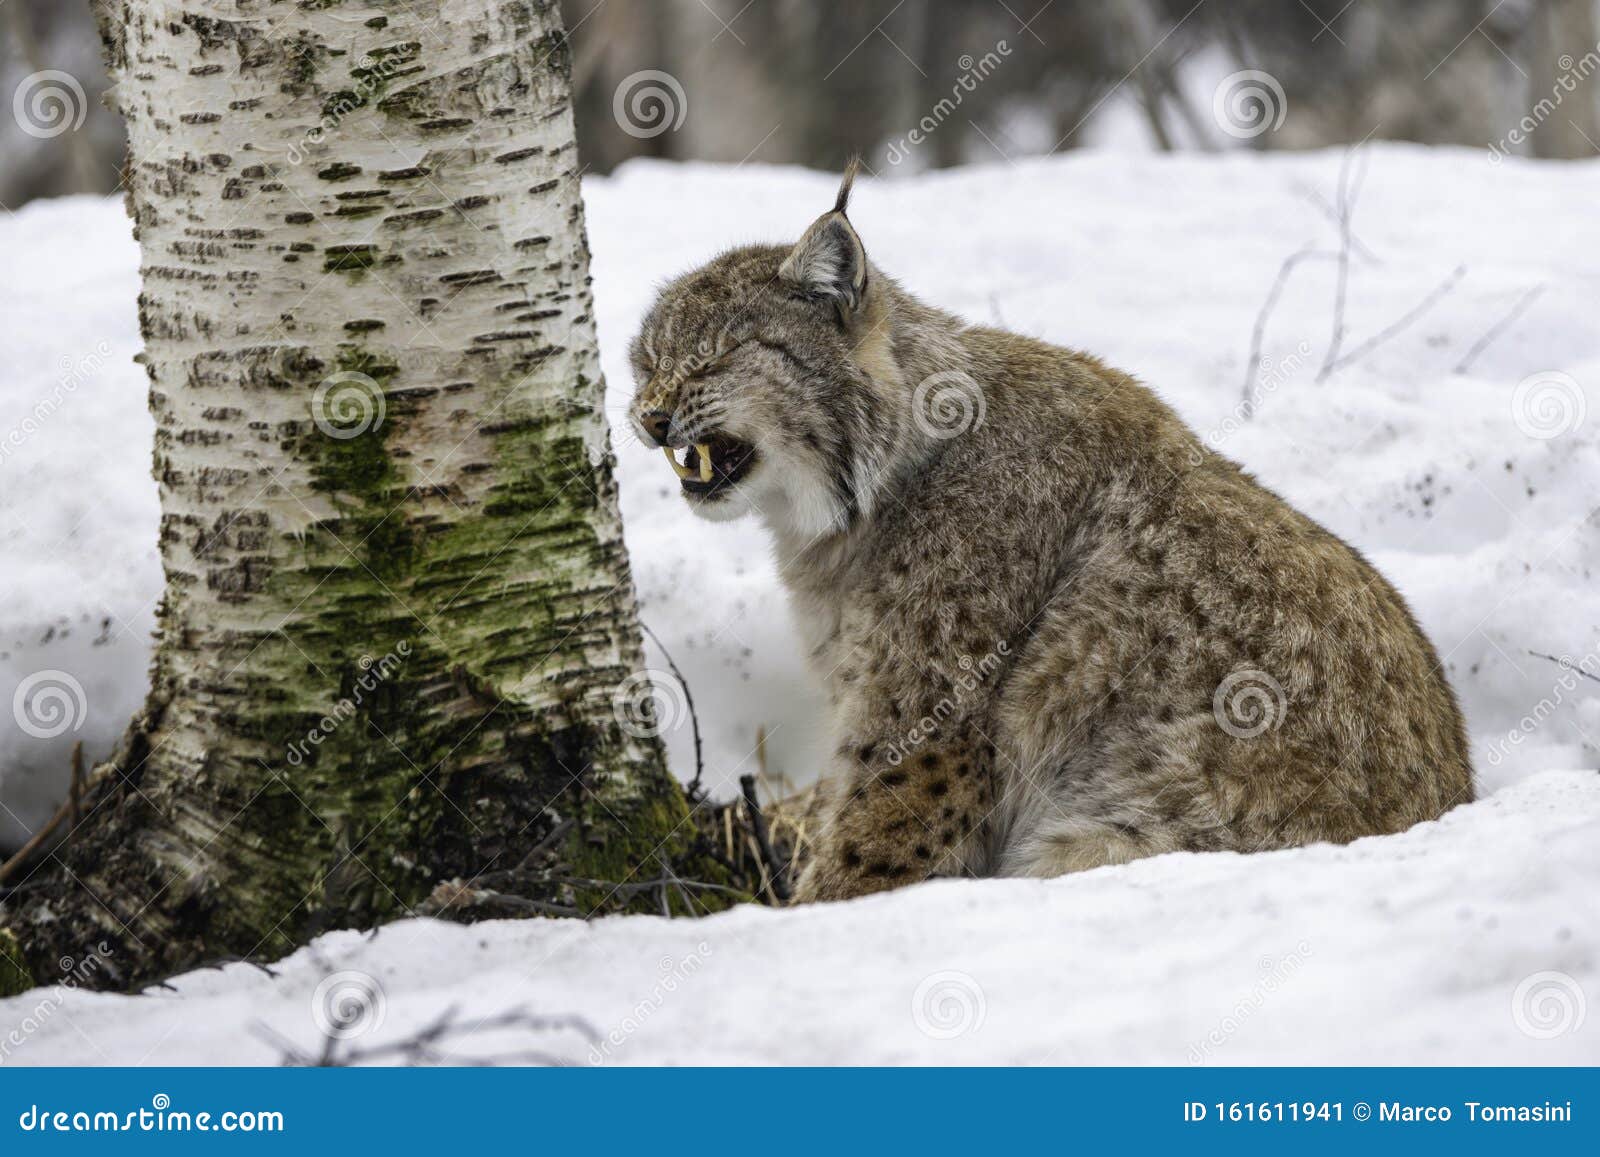 Close up of linx in winter stock image. Image of europe - 161611941